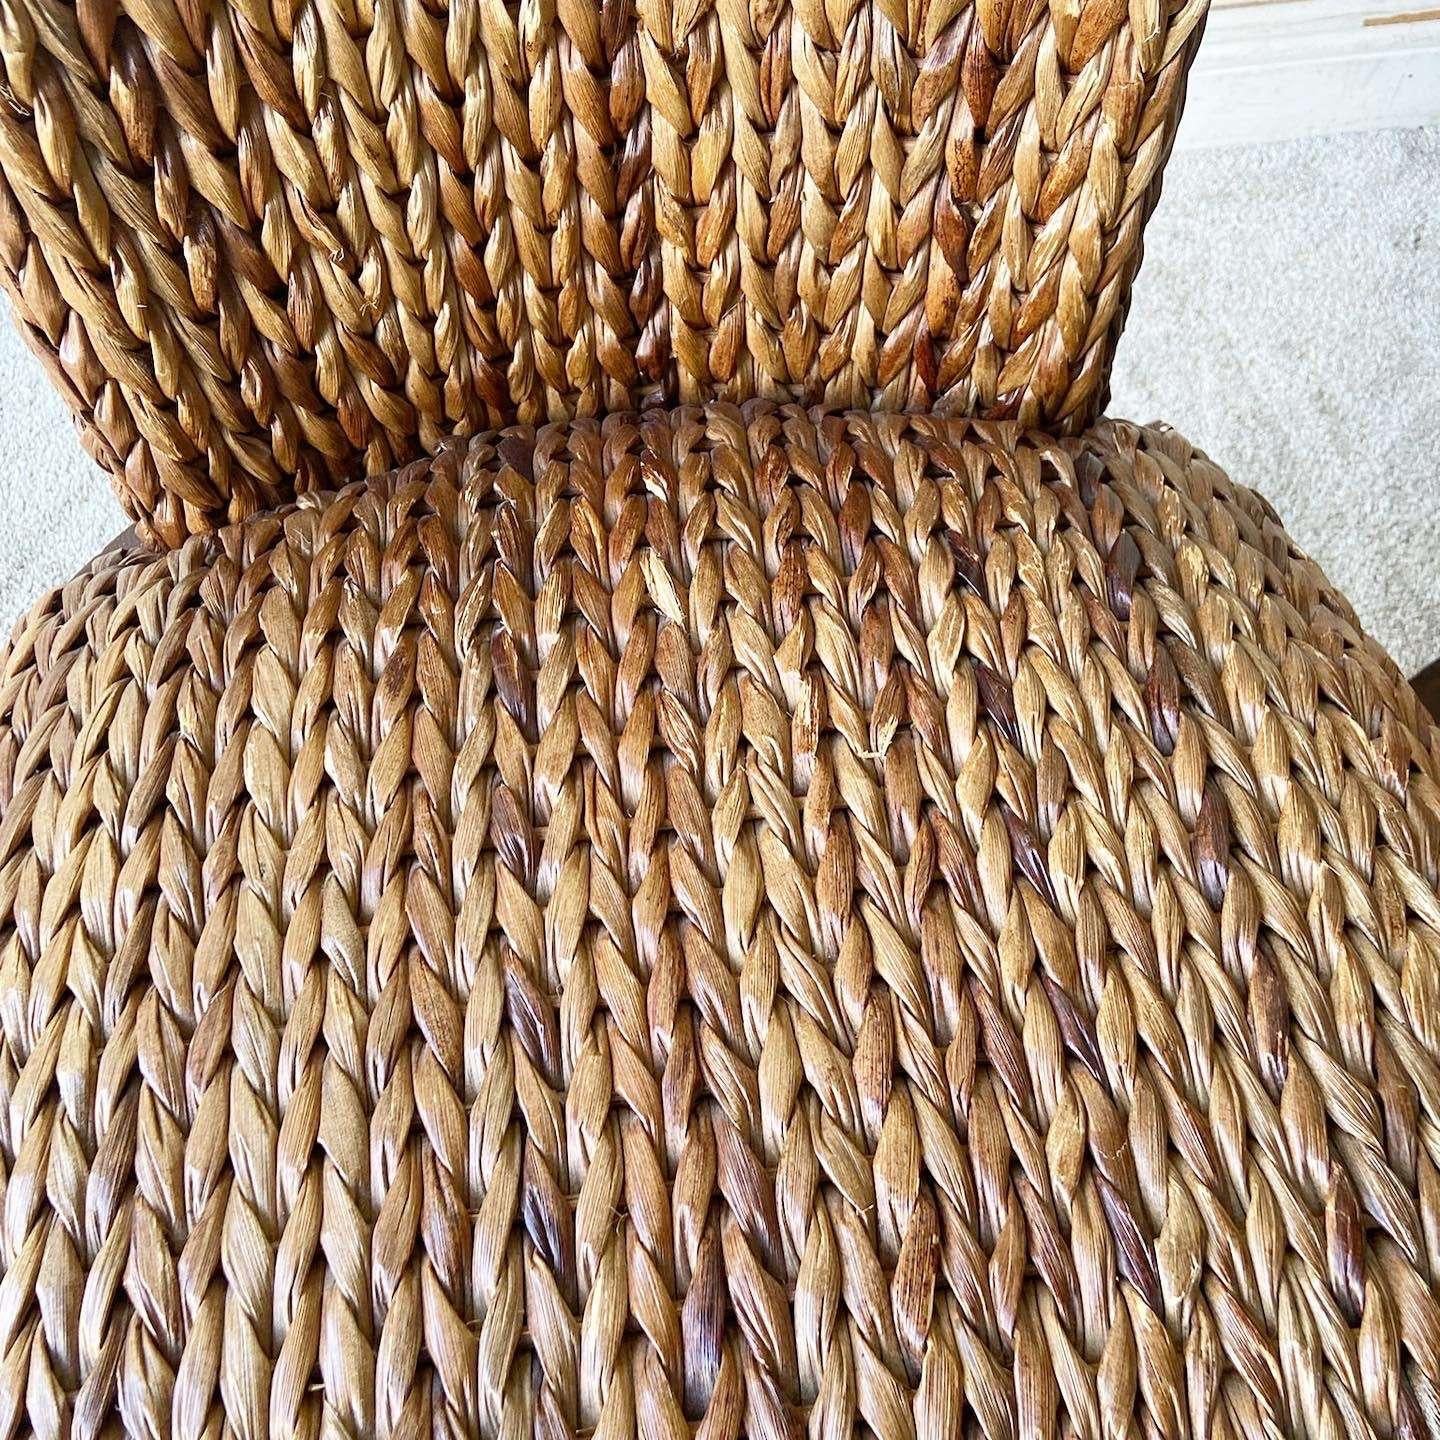 Wicker Boho Chic Woven Sea Grass Dining Chairs - Set of 4 For Sale